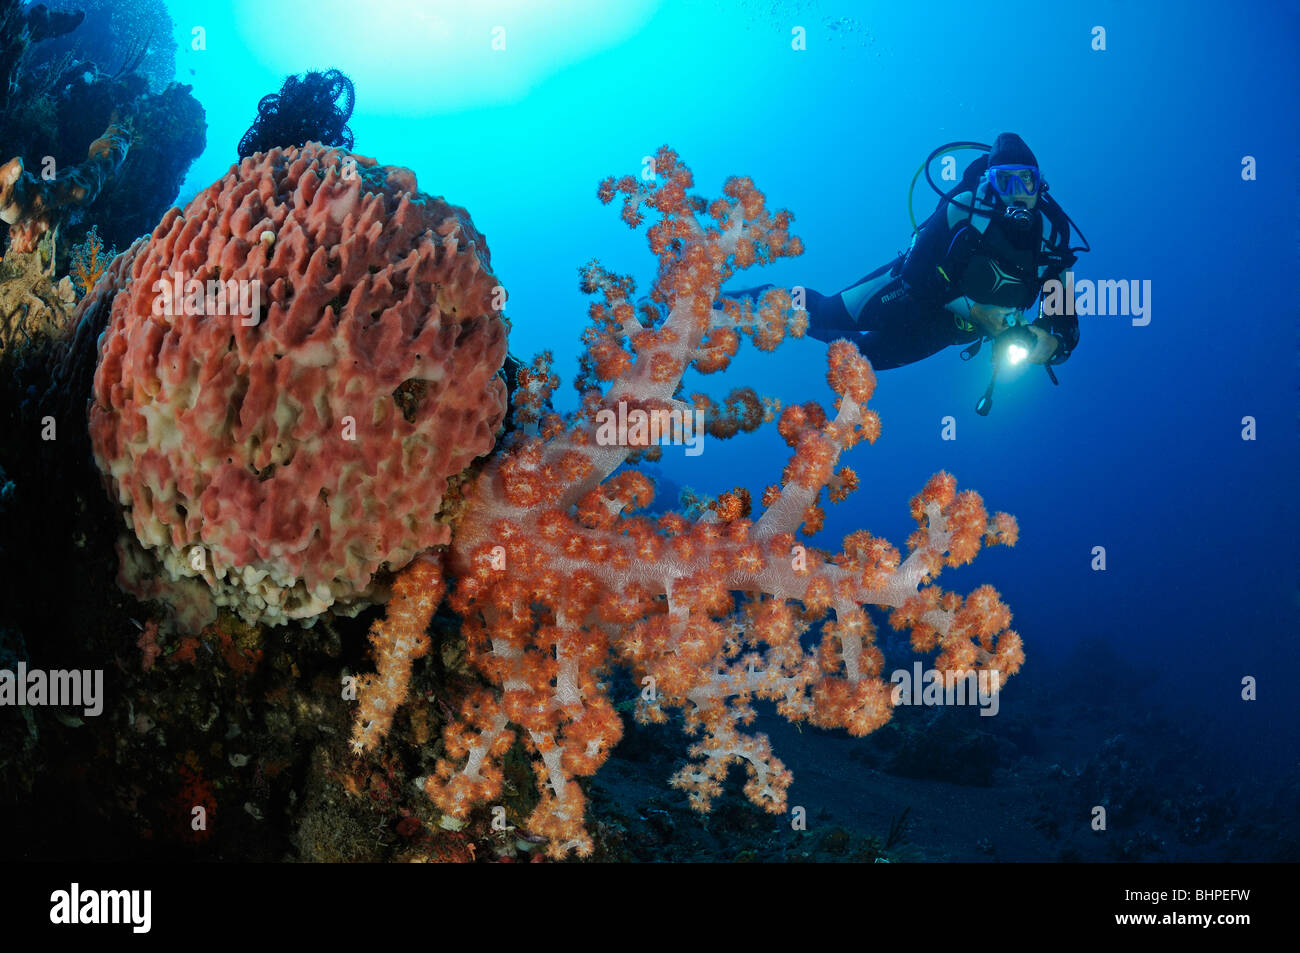 scuba diver with colorful coral reef and soft corals and barrel sponge, Bali Stock Photo